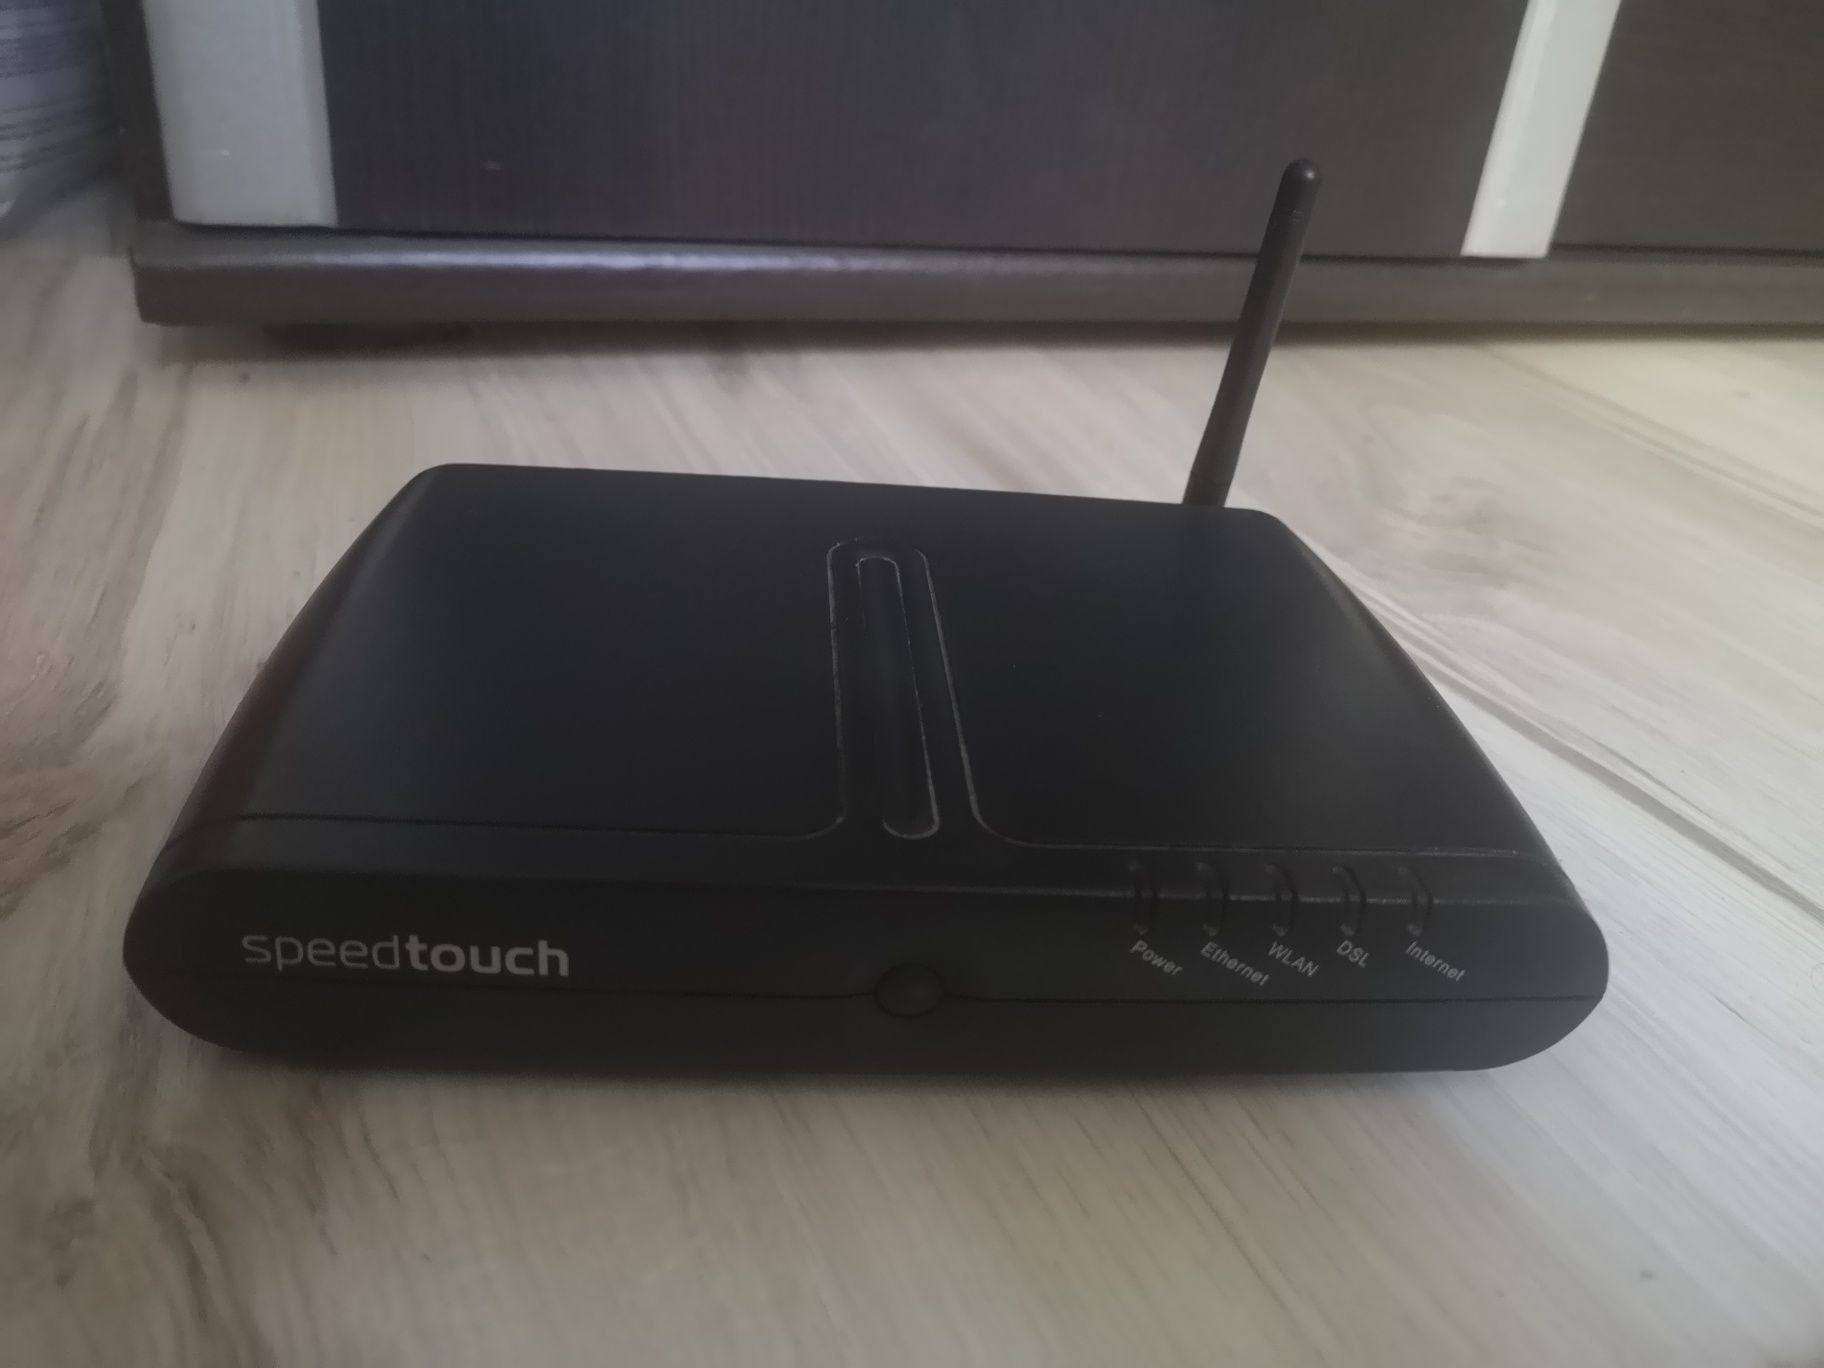 Router Speed Touch